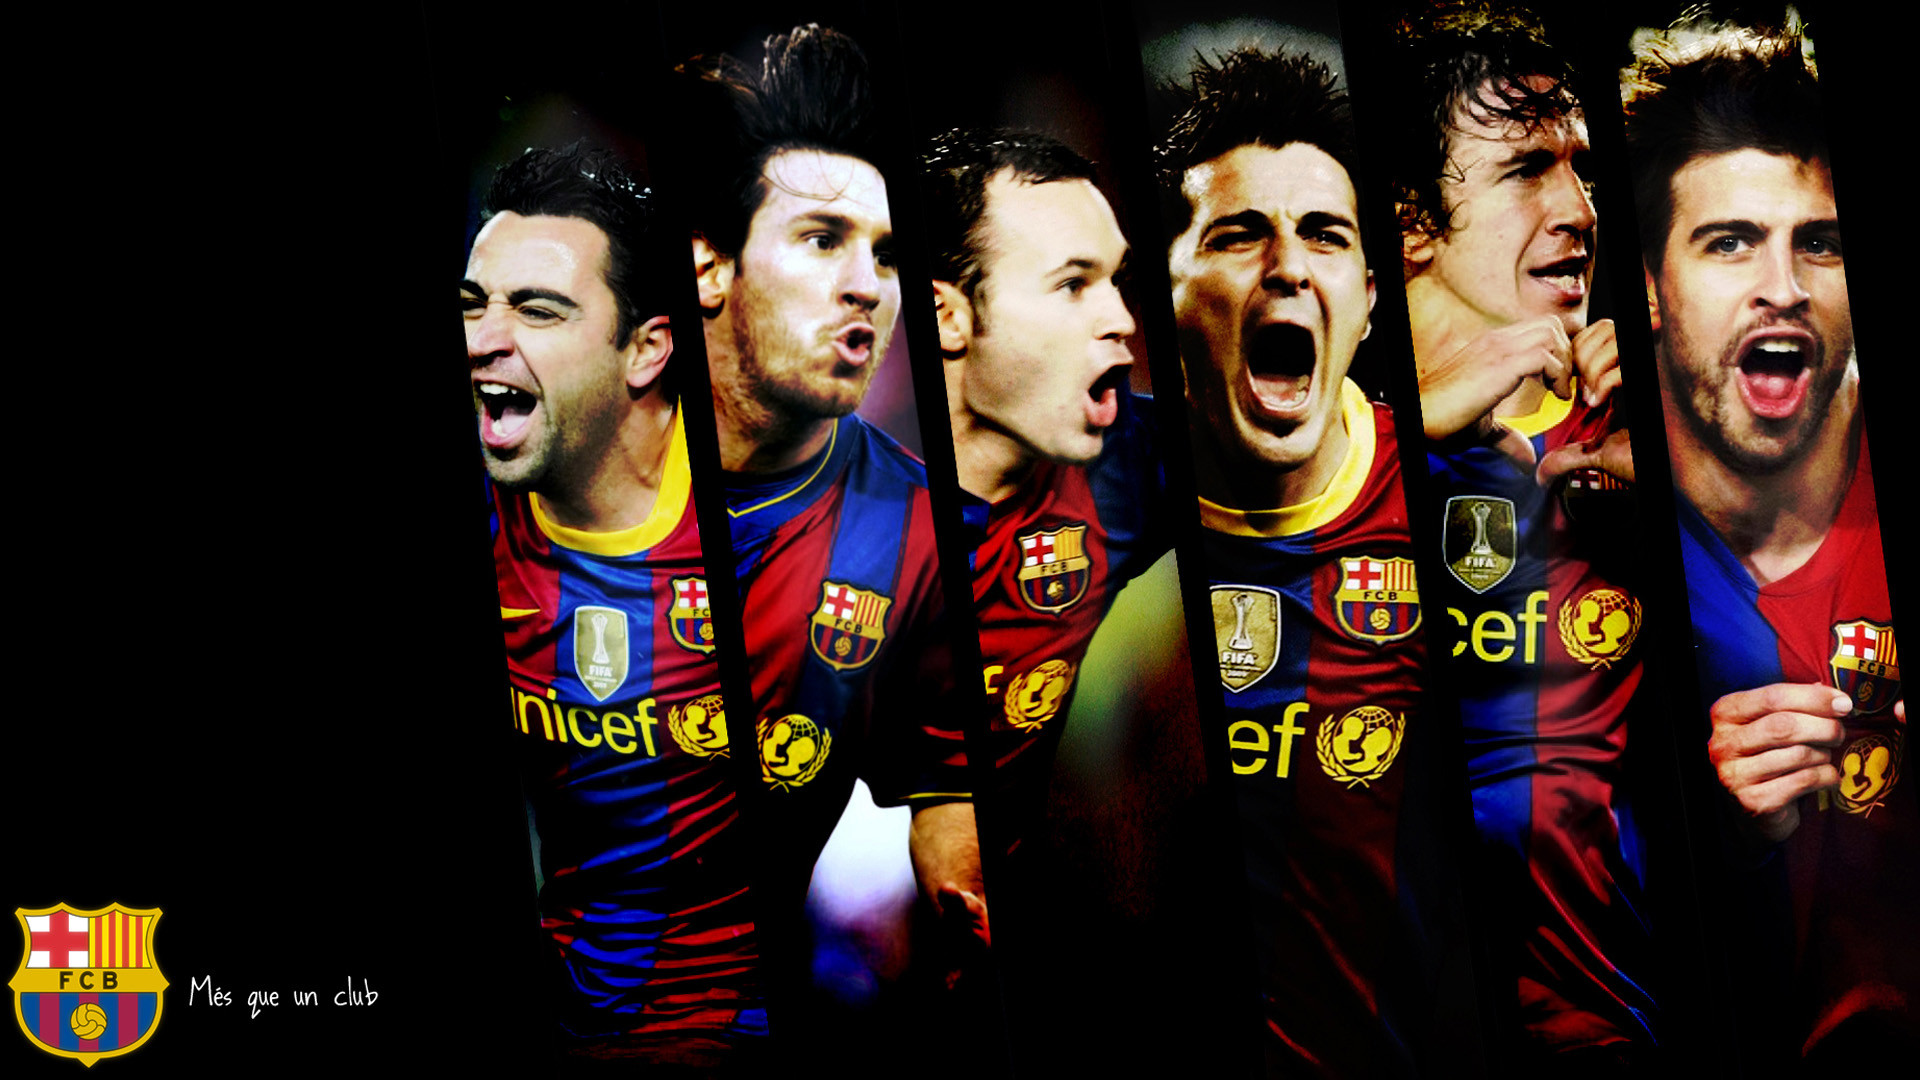 1920x1080 FC Barcelona Wallpapers HD Free Download.